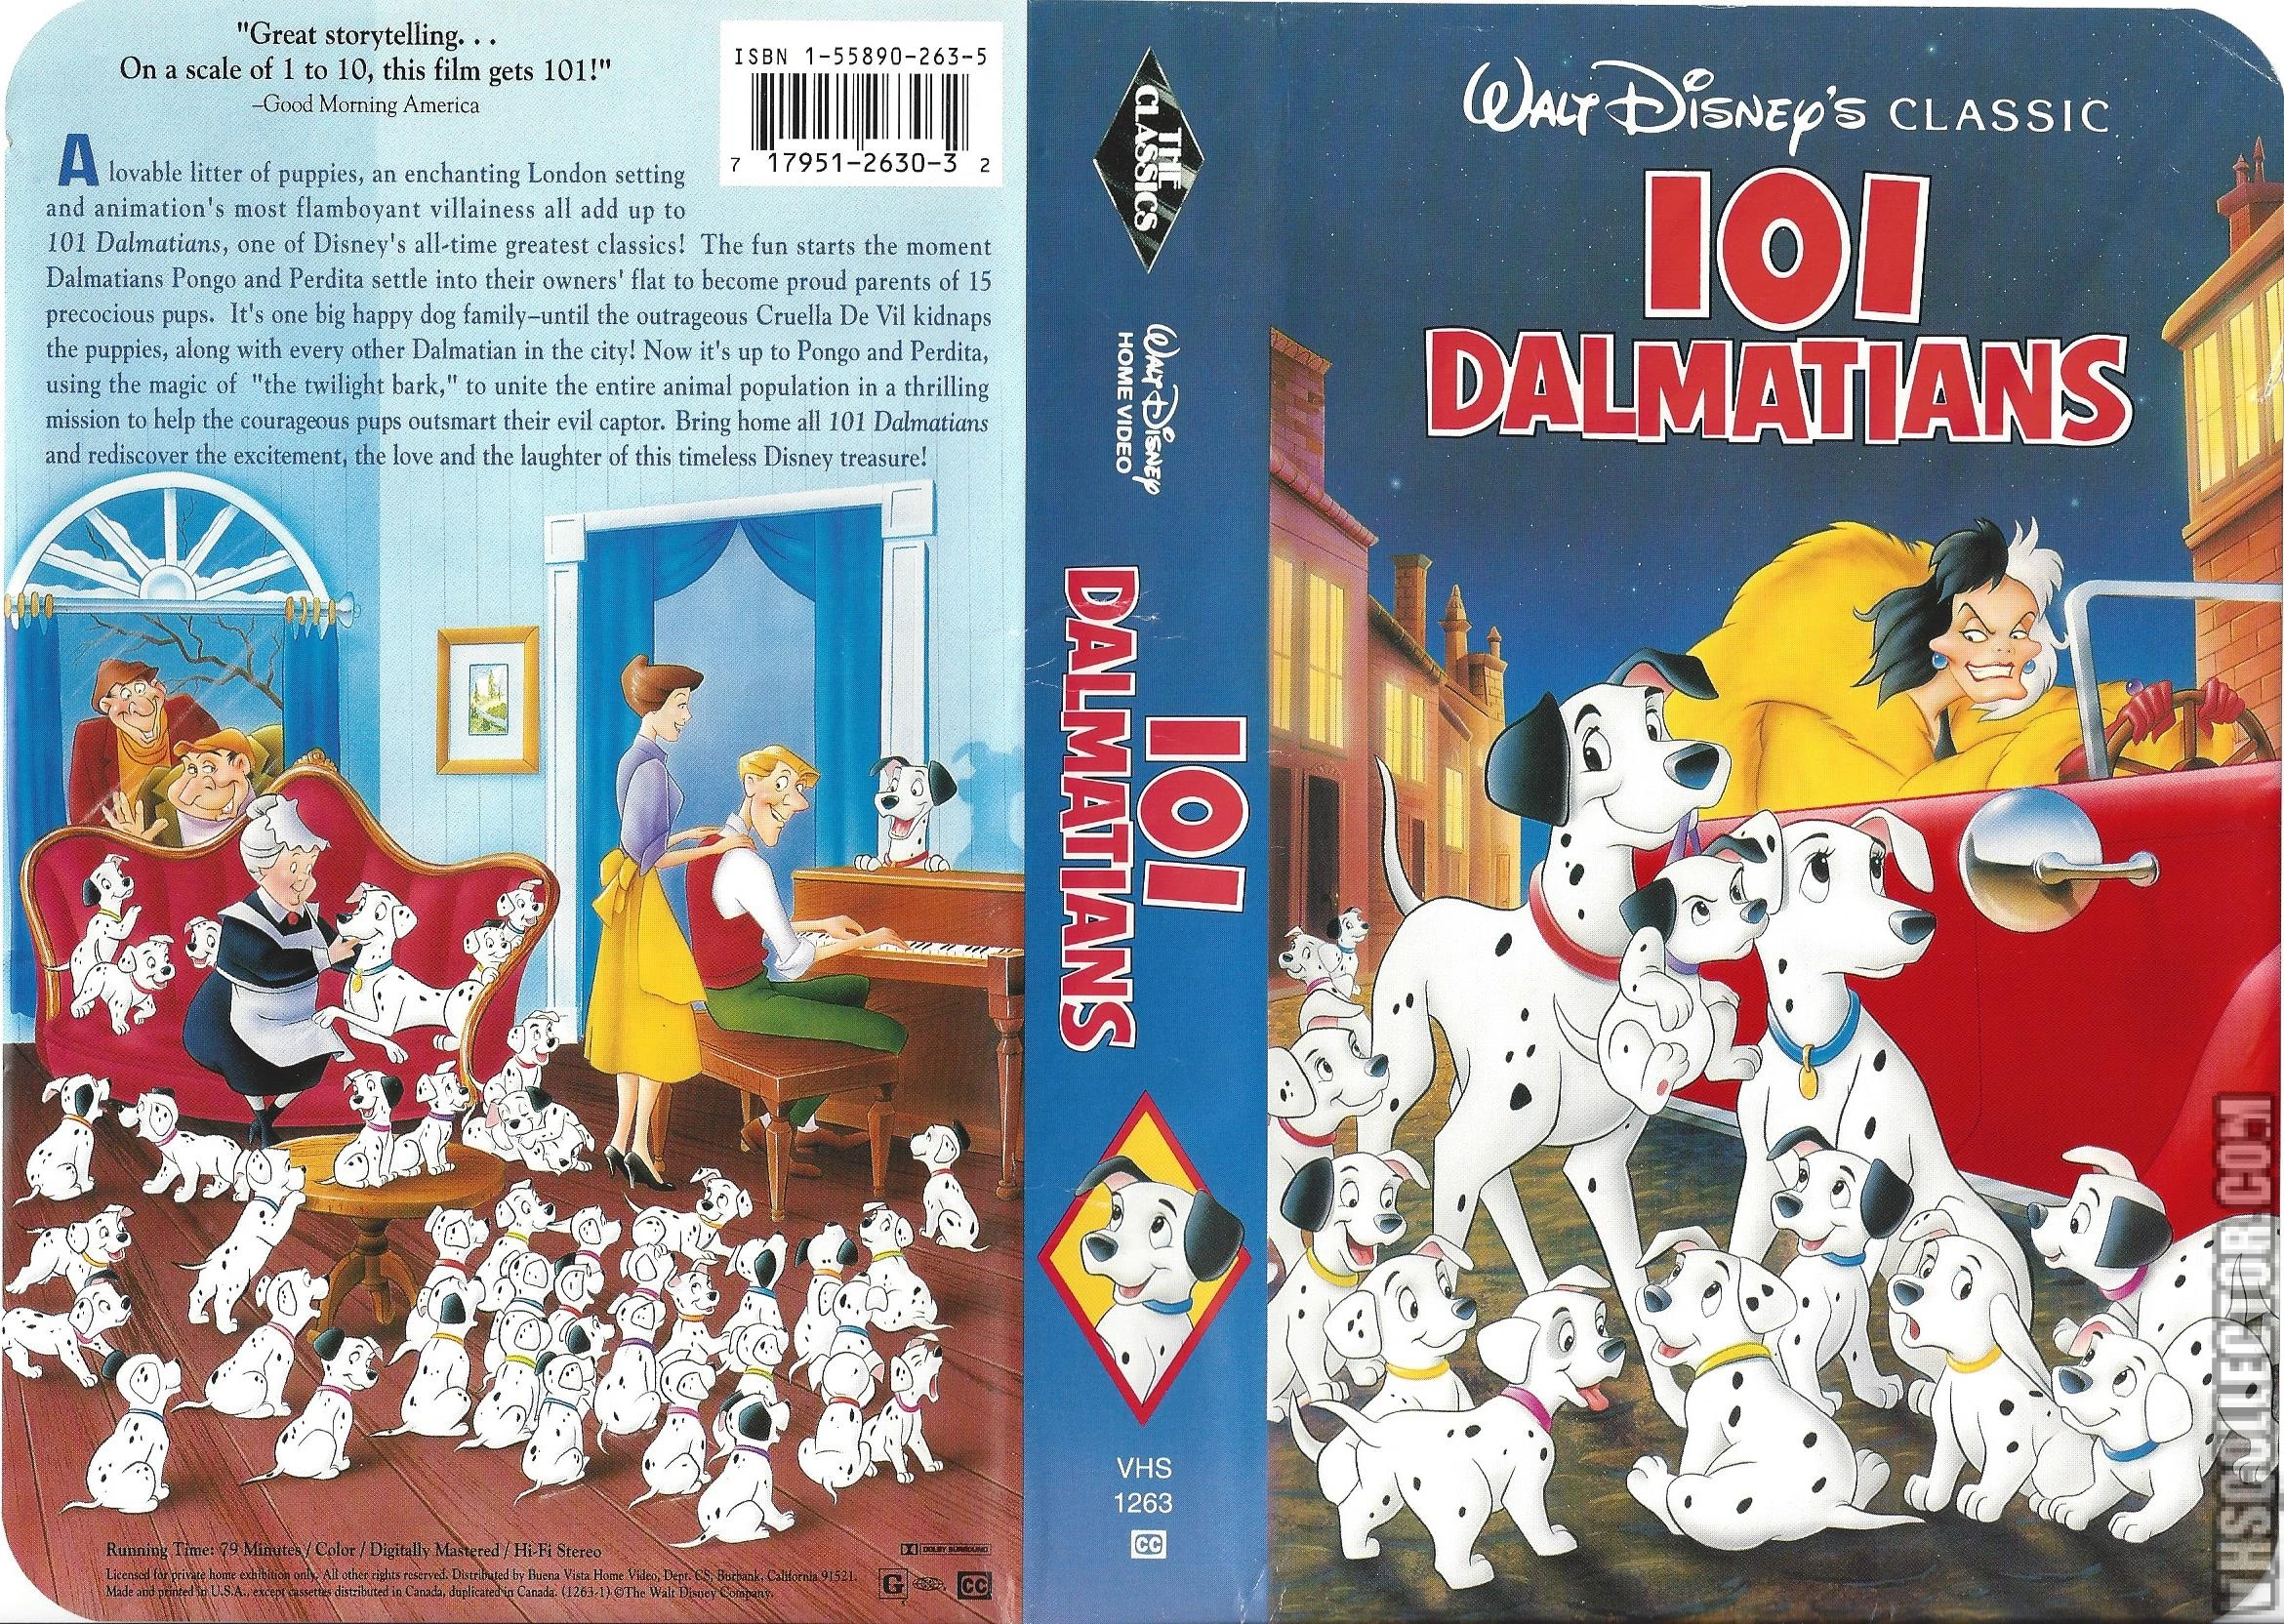 “101 Dalmatians” on VHS: Spotting Nostalgia and Adventure in a Classic Format